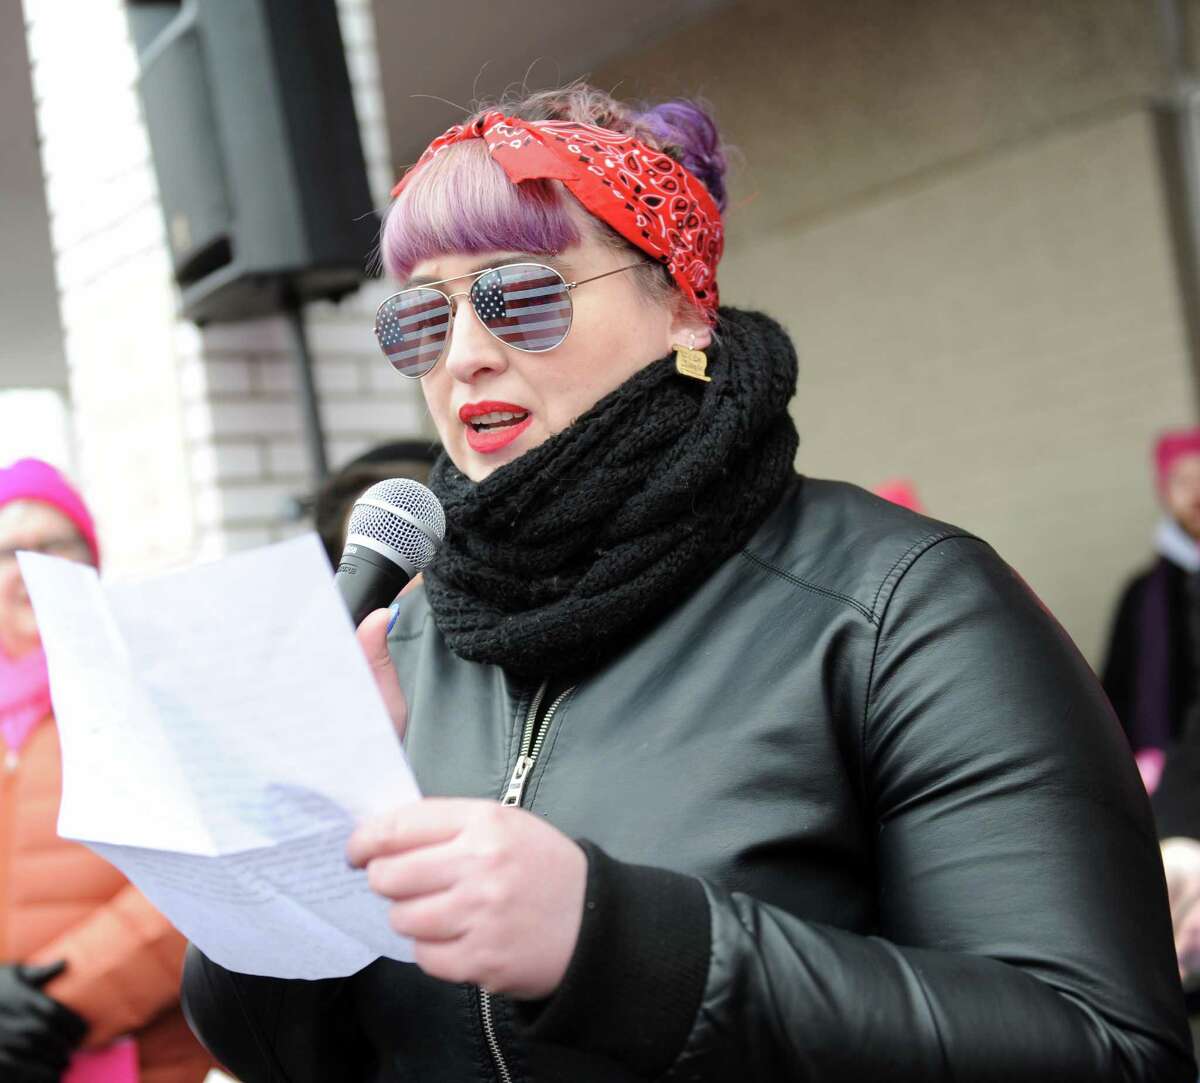 Groups rally for and against Planned Parenthood in Albany, Troy